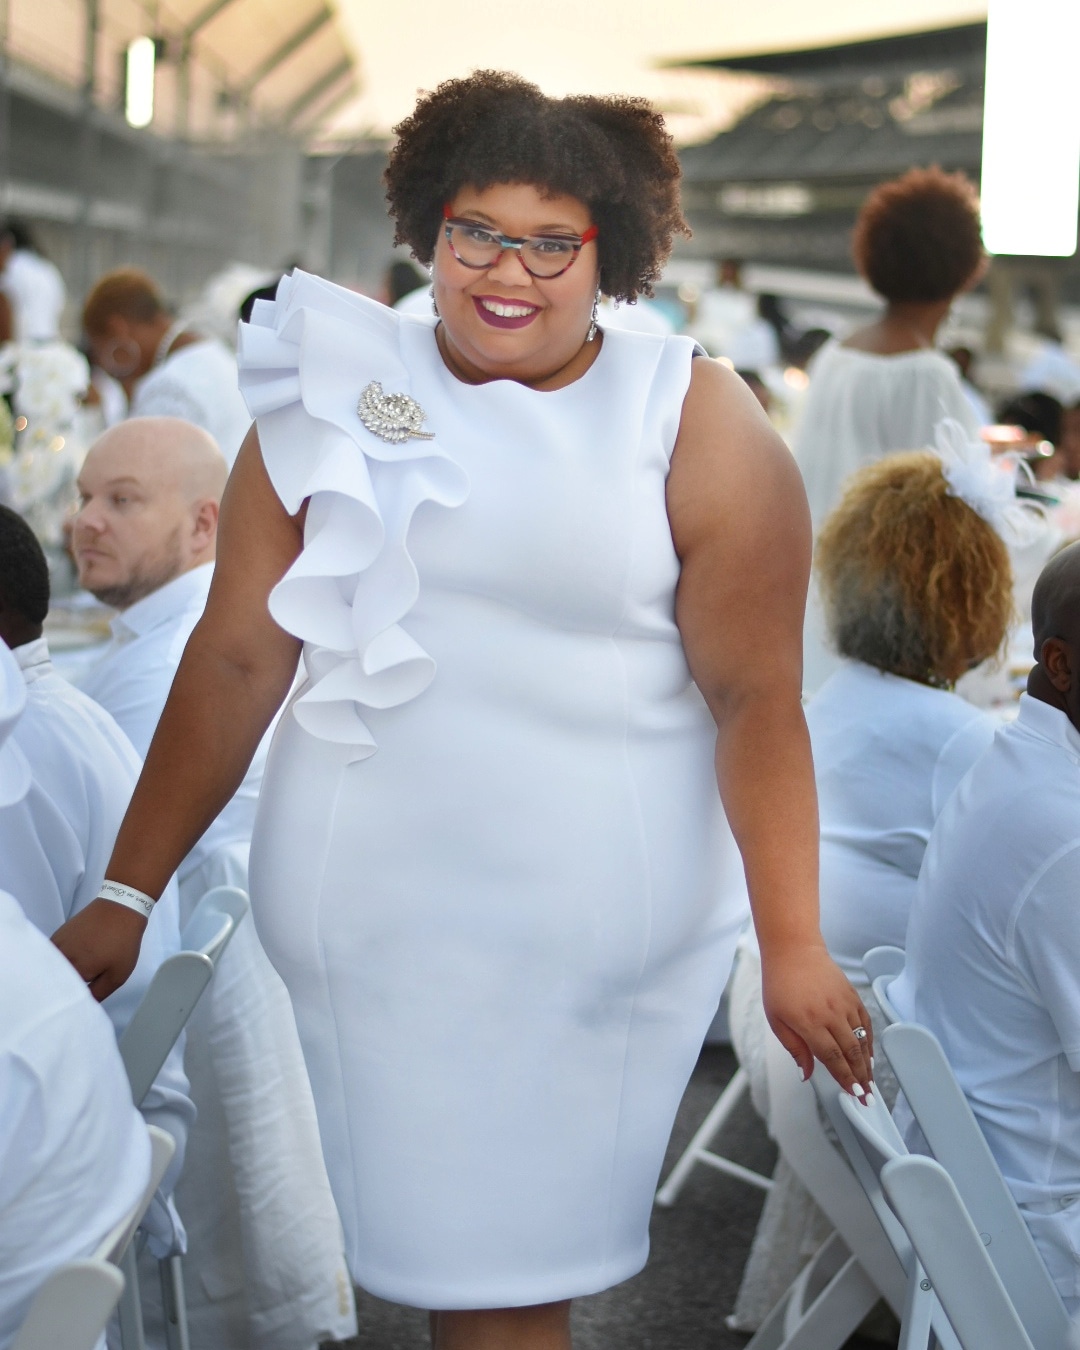 Diner en Blanc at the Indianapolis Motor Speedway